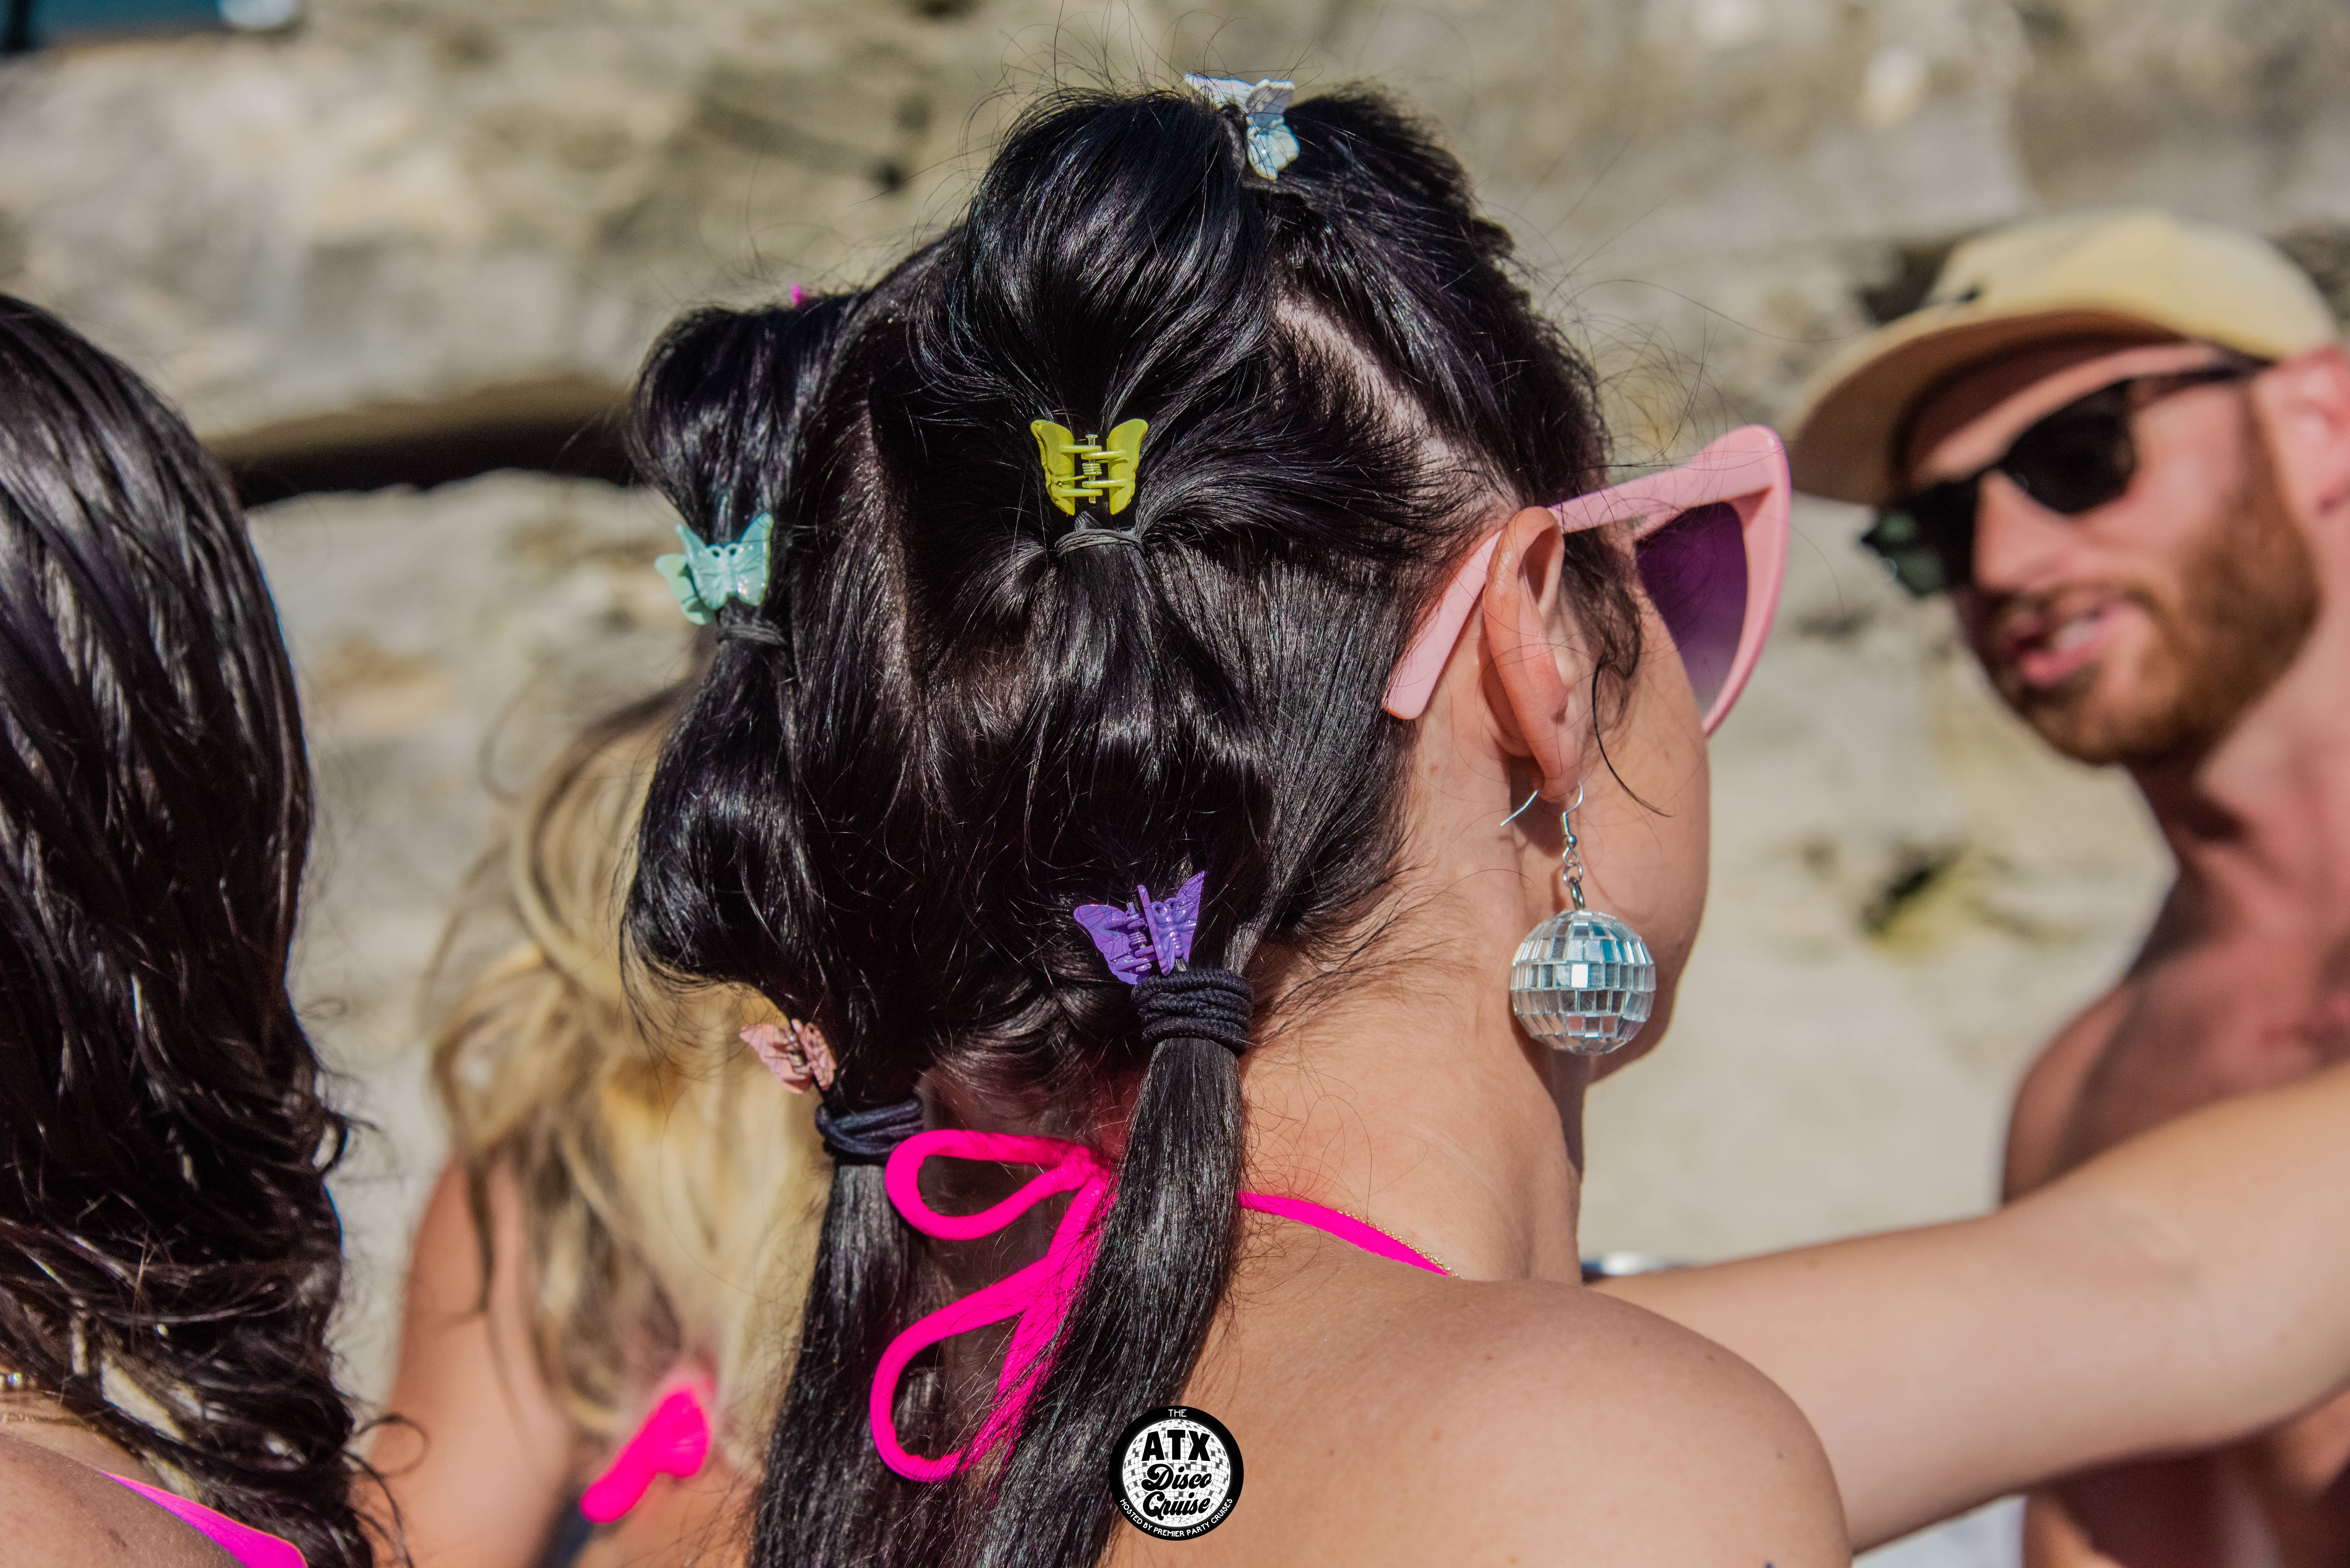 Cool party accessories at a bachelorette party in Austin by Premier Party Cruises